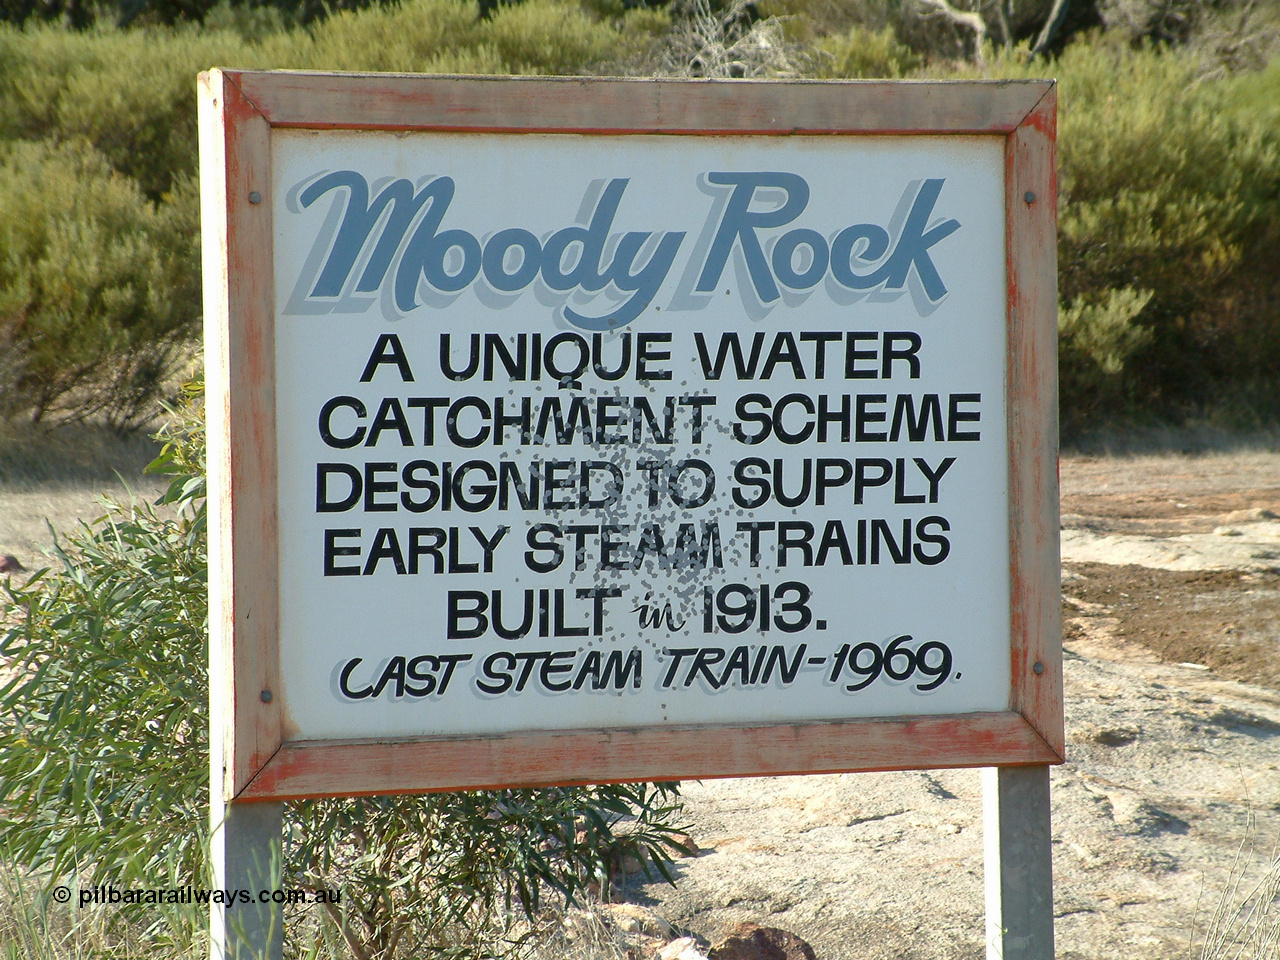 030409 154635
Moody Tank, signage outlining function.
